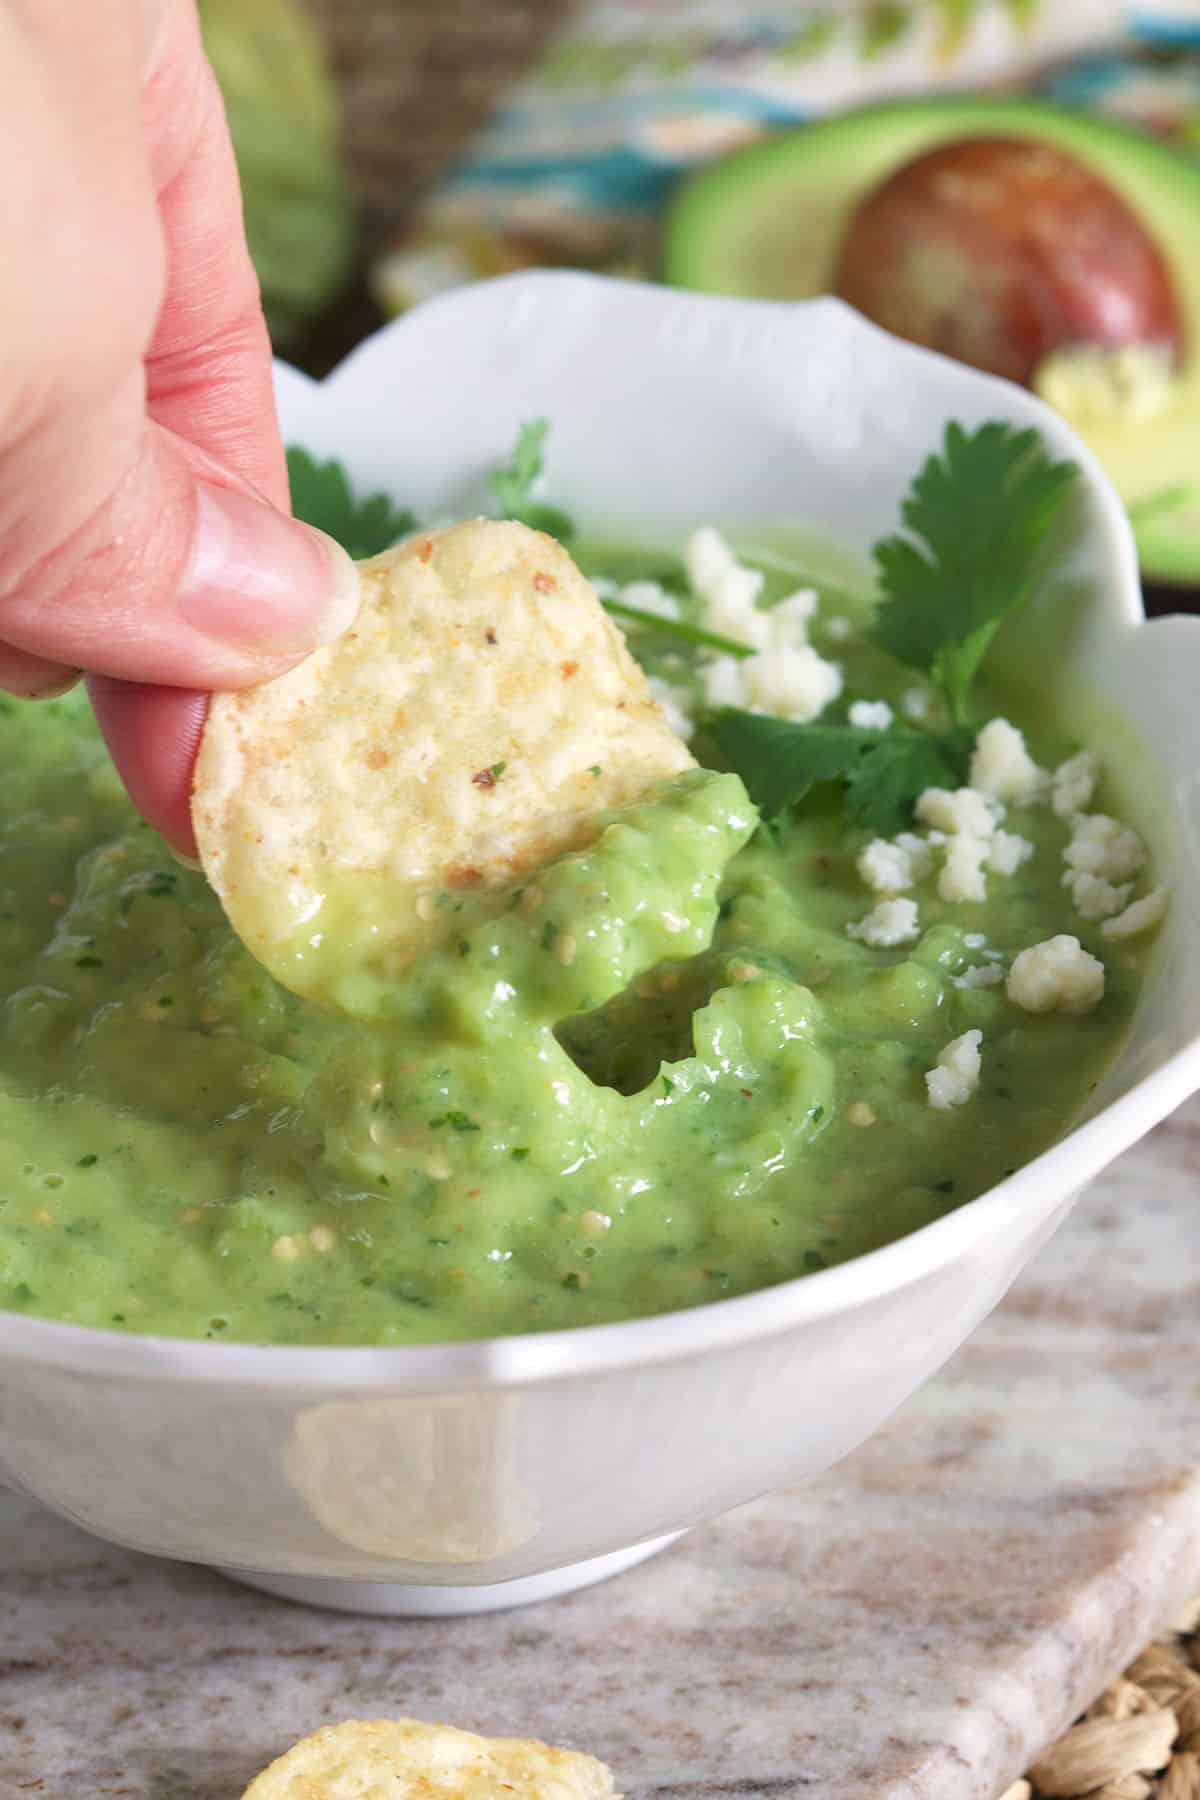 A tortilla chip is scooping up a bite sized portion of salsa.